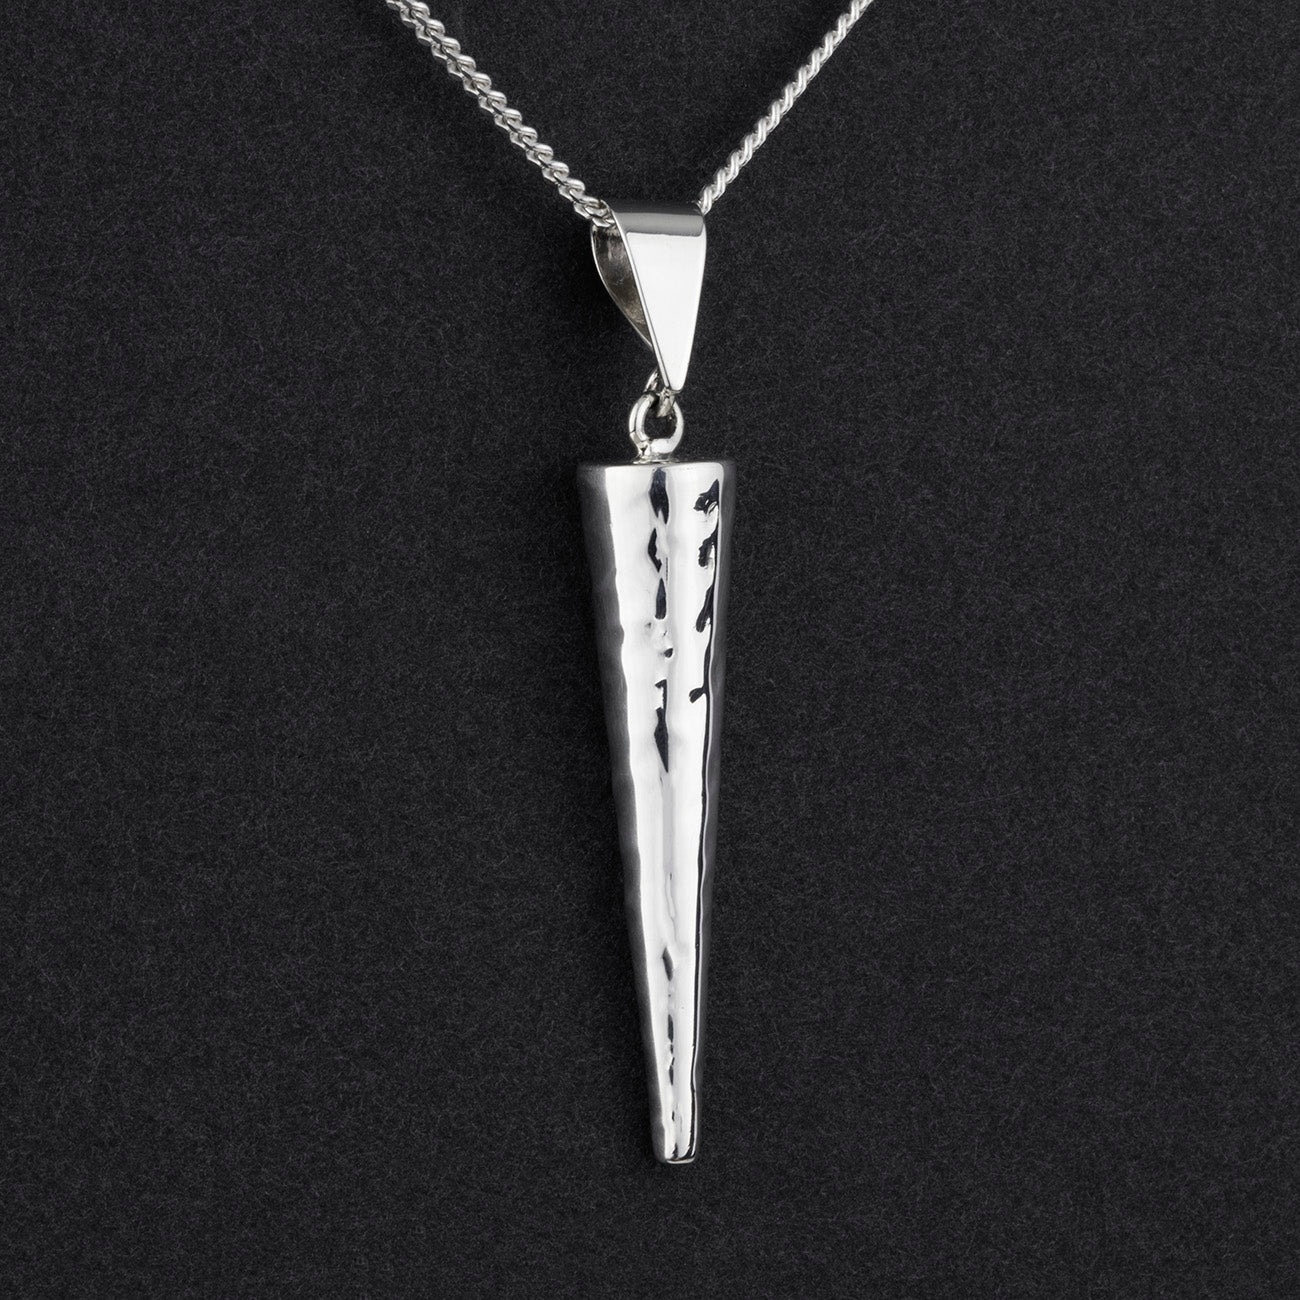 hammered silver cone shaped pendant necklace